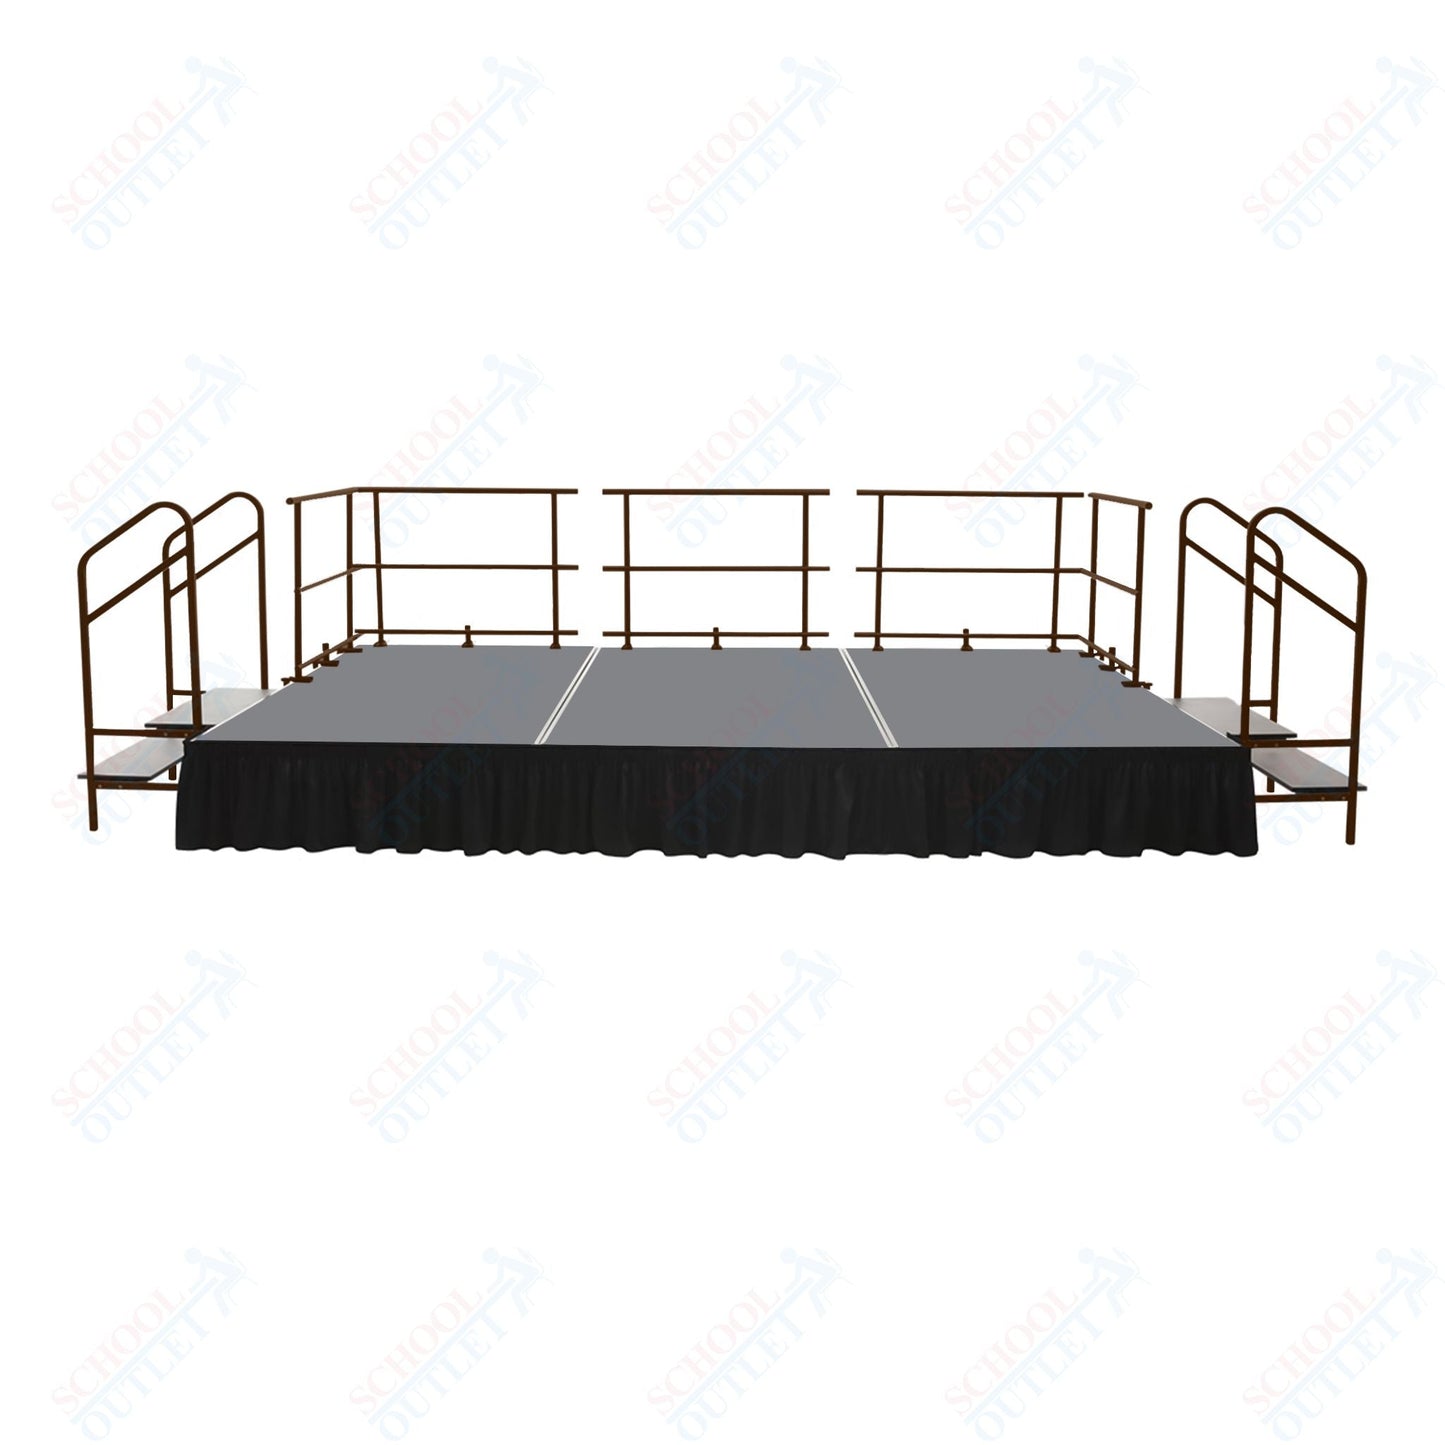 AmTab Fixed Height Stage Set - Polypropylene Top - 16'W x 32'L x 2'H (192"W x 384"L x 24"H) (AmTab AMT - STS163224P) - SchoolOutlet